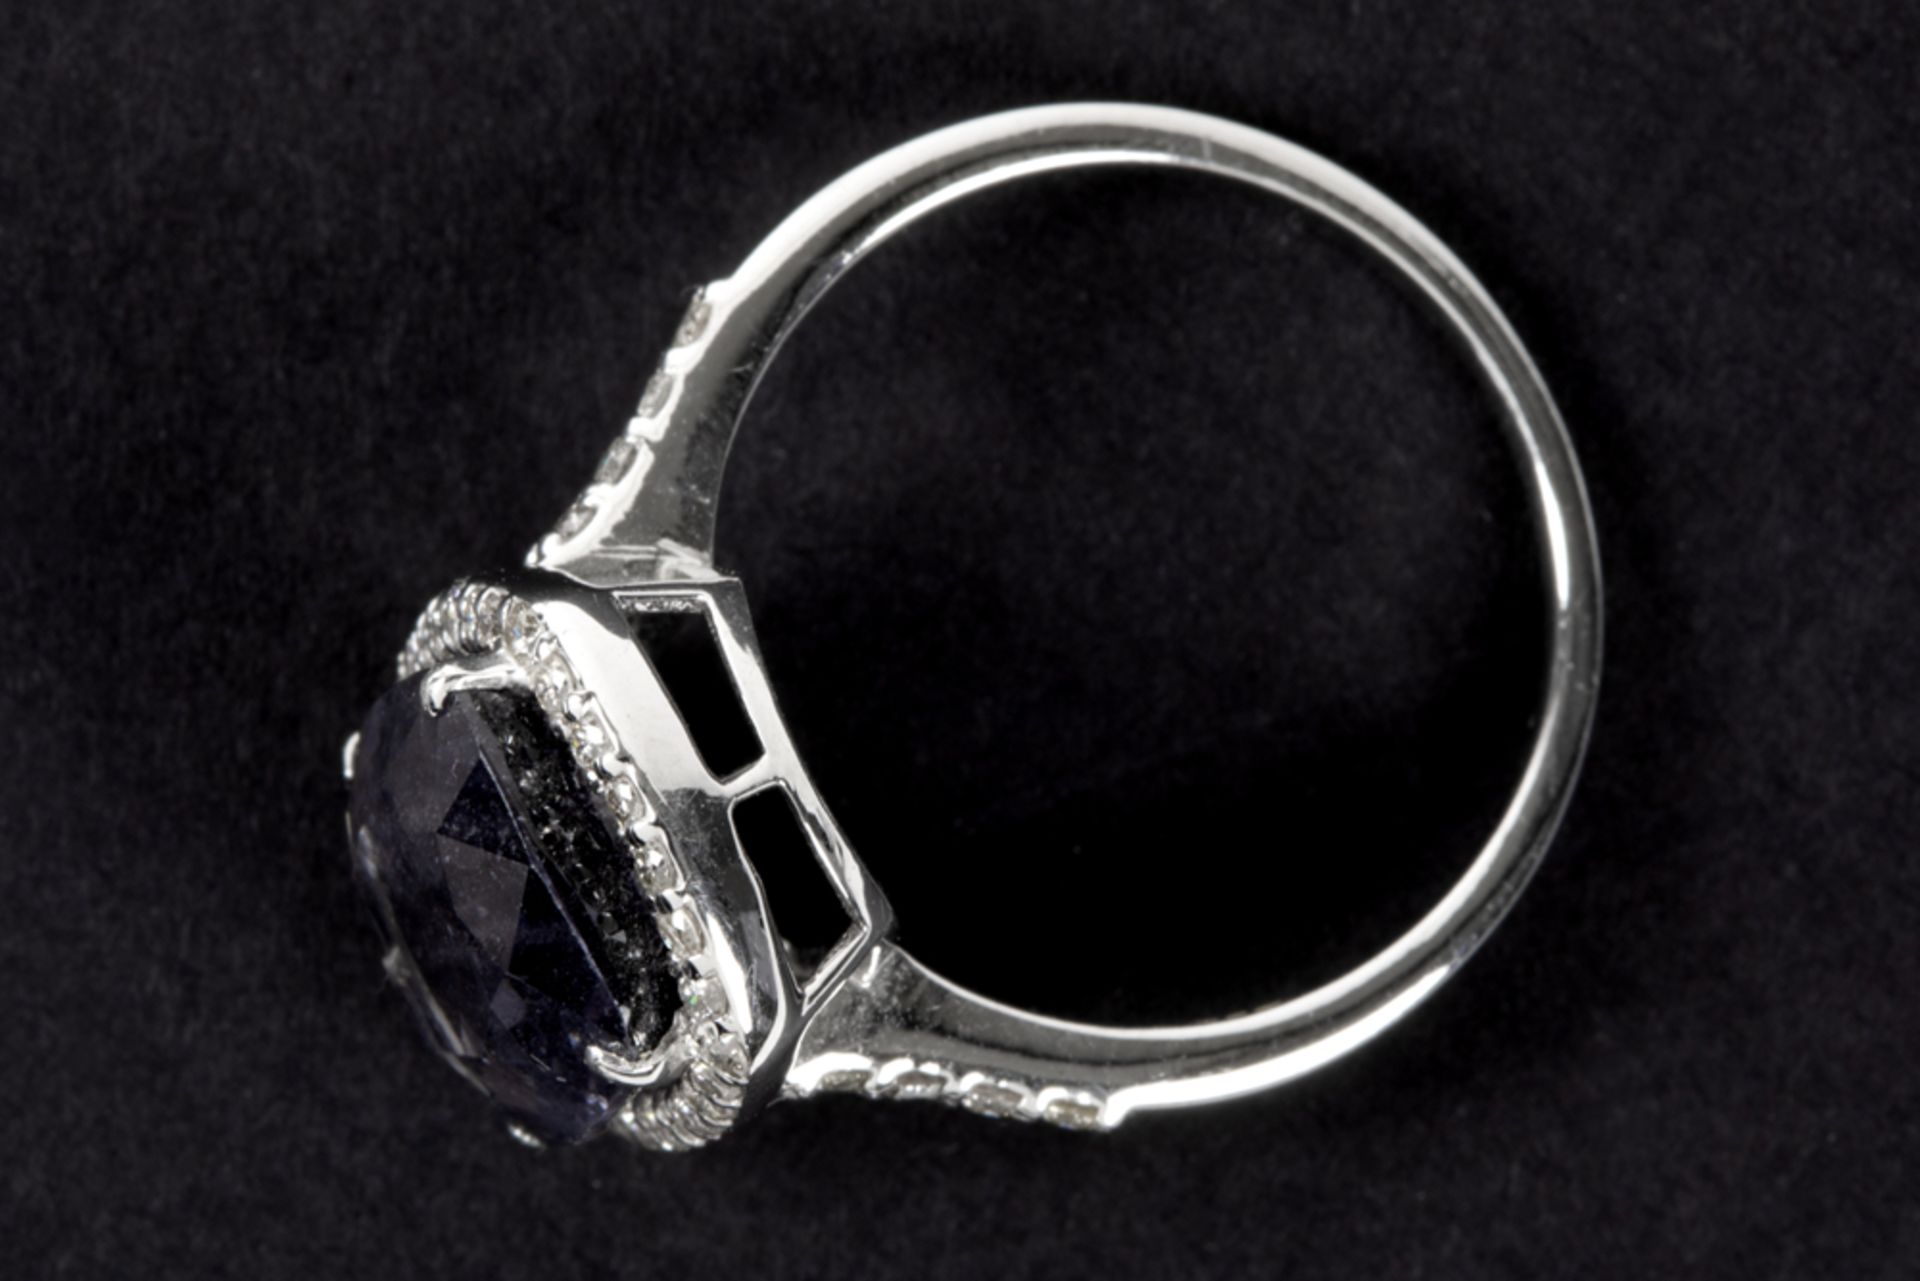 ring in white gold (18 carat) with a ca 4,70 carat quite special Burmese Spinel with typical color - Image 2 of 2